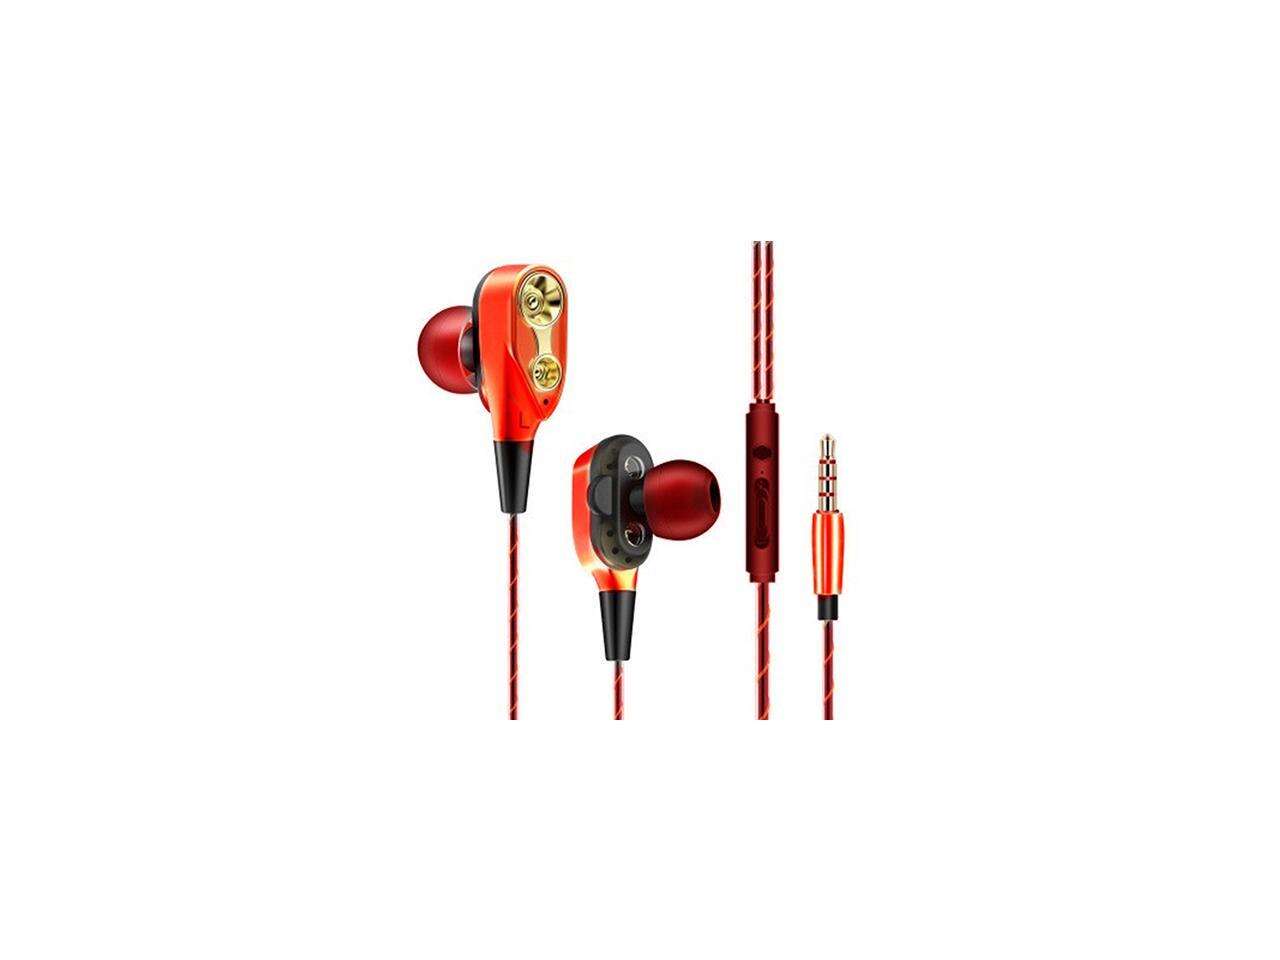 AutofeelSunriseoffice Four Core Double Moving Sport Headphones 4D Super Bass Stereo Earphone Music Headset With Mic For Phone Computer PC Xiaomi